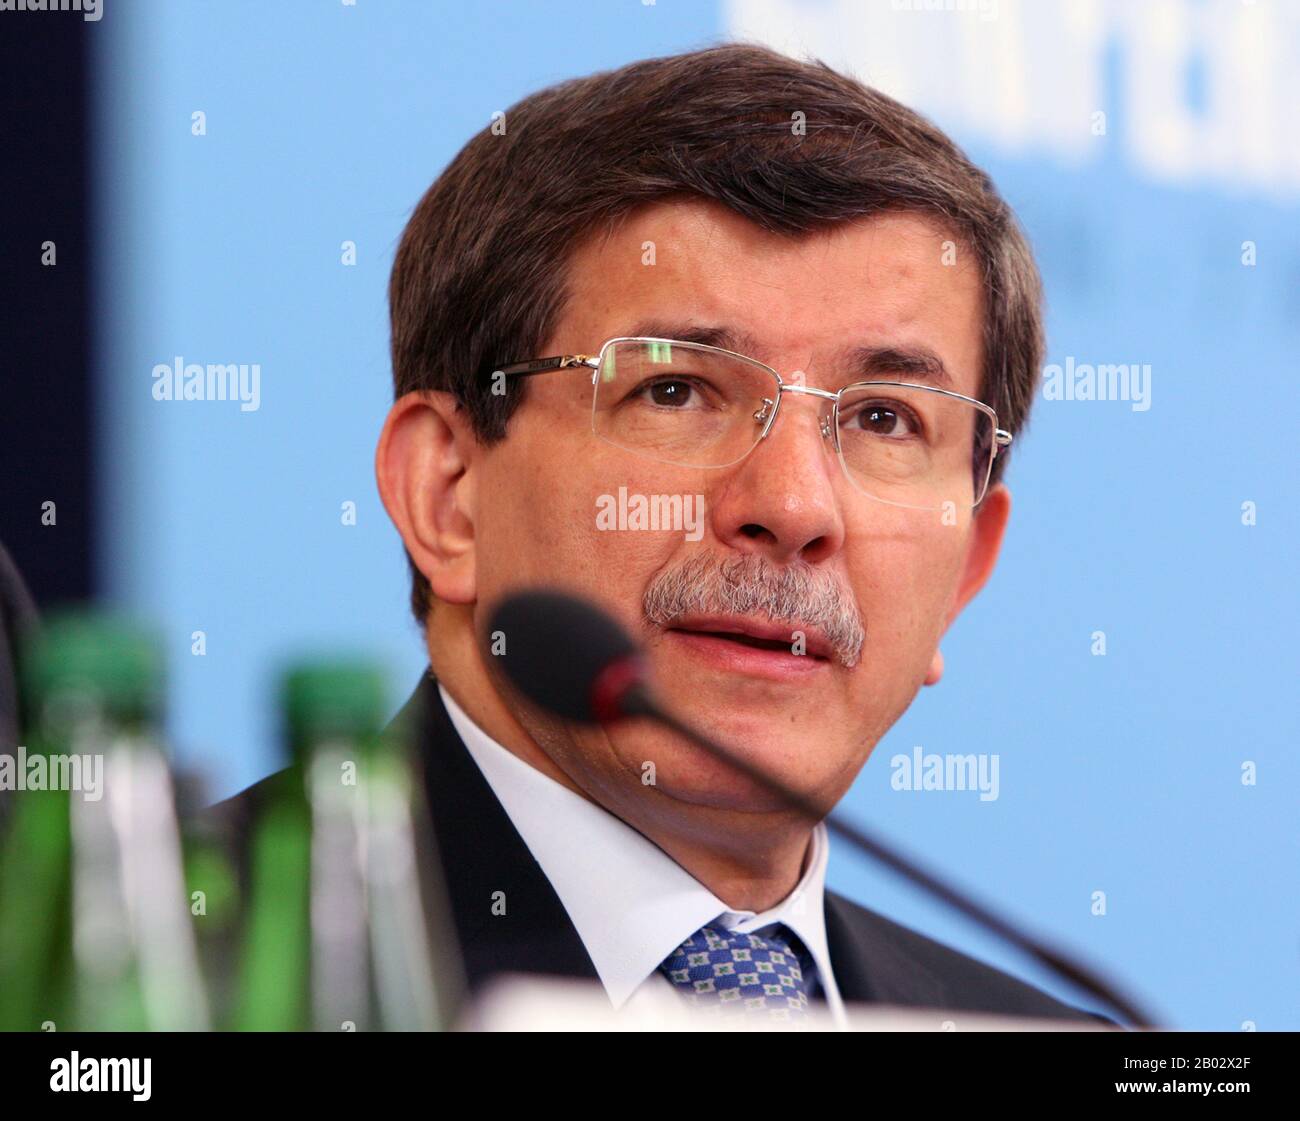 Ahmet Davutoglu (born 26 February 1959) is a Turkish diplomat and politician who has been the Prime Minister of Turkey since 28 August 2014 and the leader of the Justice and Development Party (AKP) since 27 August 2014. He previously served as the Minister of Foreign Affairs from 2009 to 2014.  Following the election of serving Prime Minister and AKP leader Recep Tayyip Erdogan as the 12th President of Turkey, Davutoglu was announced by the AKP Central Executive Committee as a candidate for the party leadership. He was unanimously elected as leader unopposed during the first AKP extraordinary Stock Photo